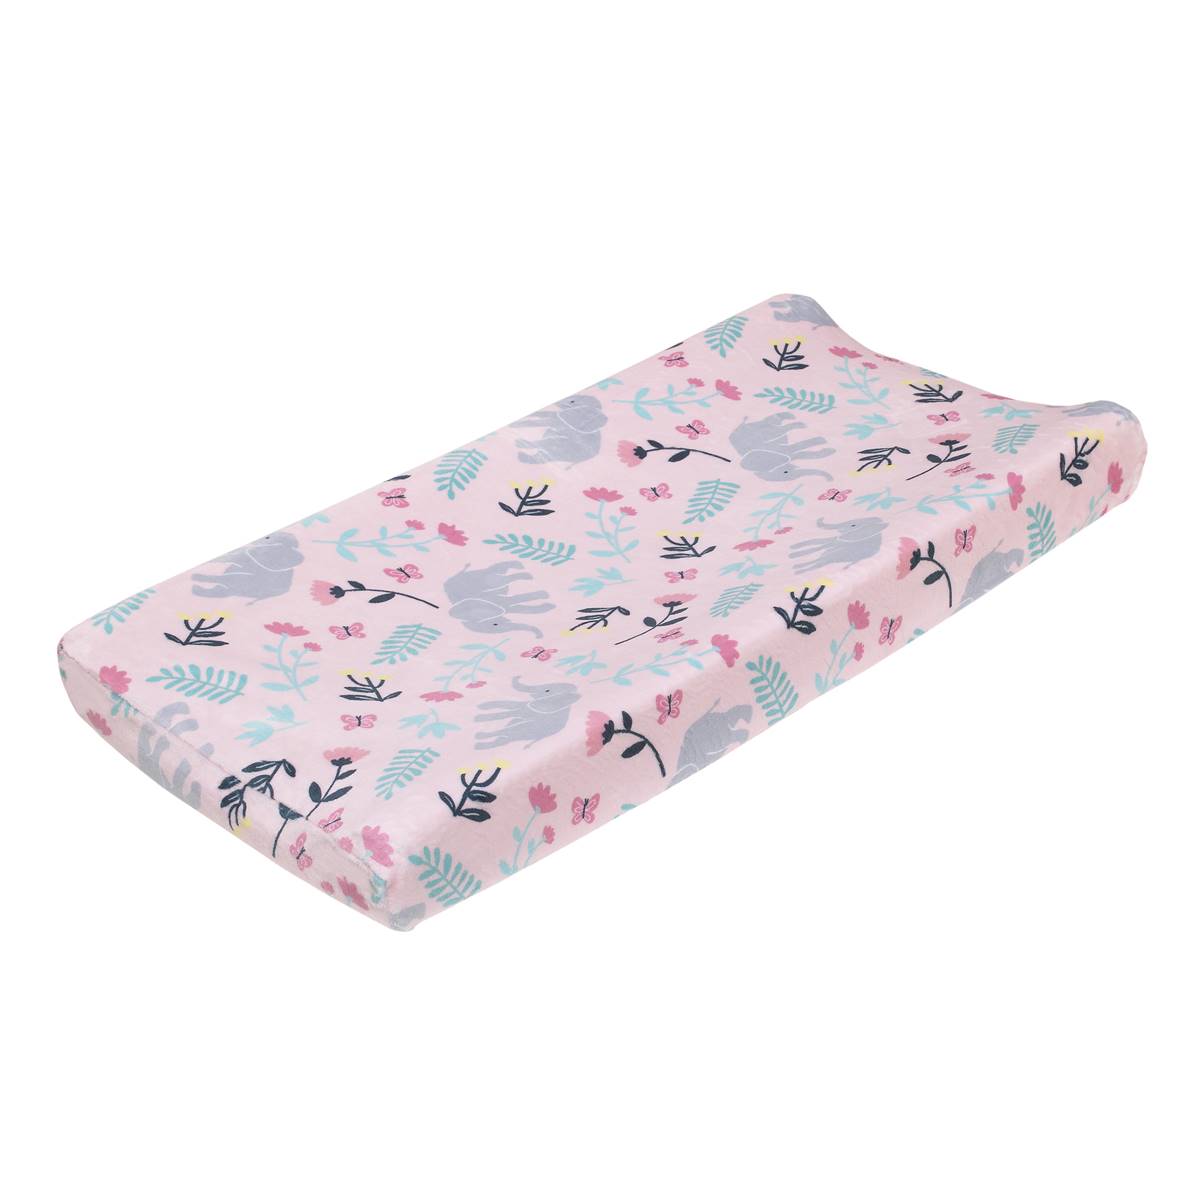 Carters(R) Floral Elephant Super Soft Changing Pad Cover